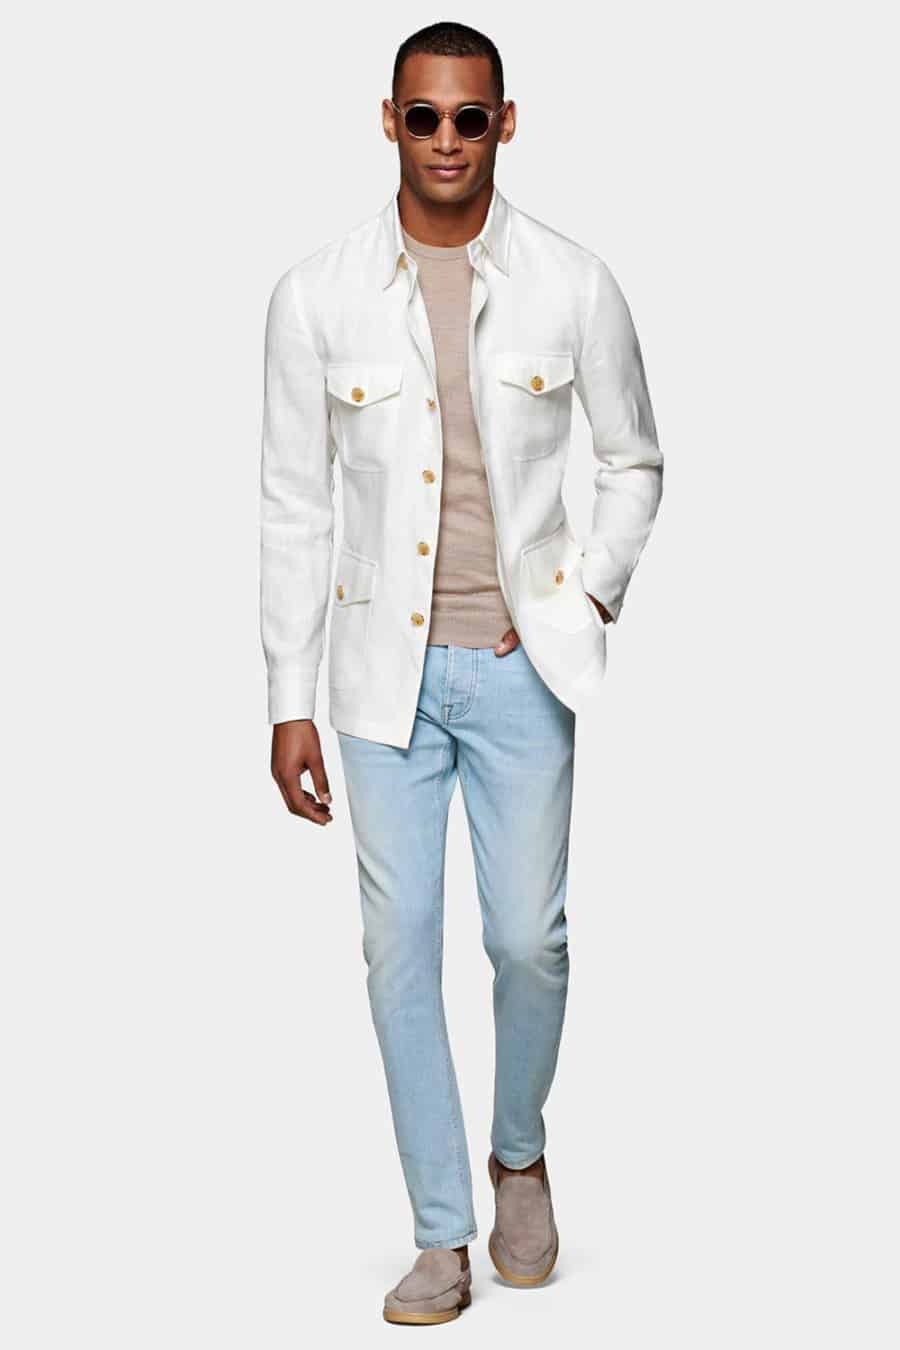 Men's light wash jeans, beige T-shirt, white safari jacket and suede loafers outfit